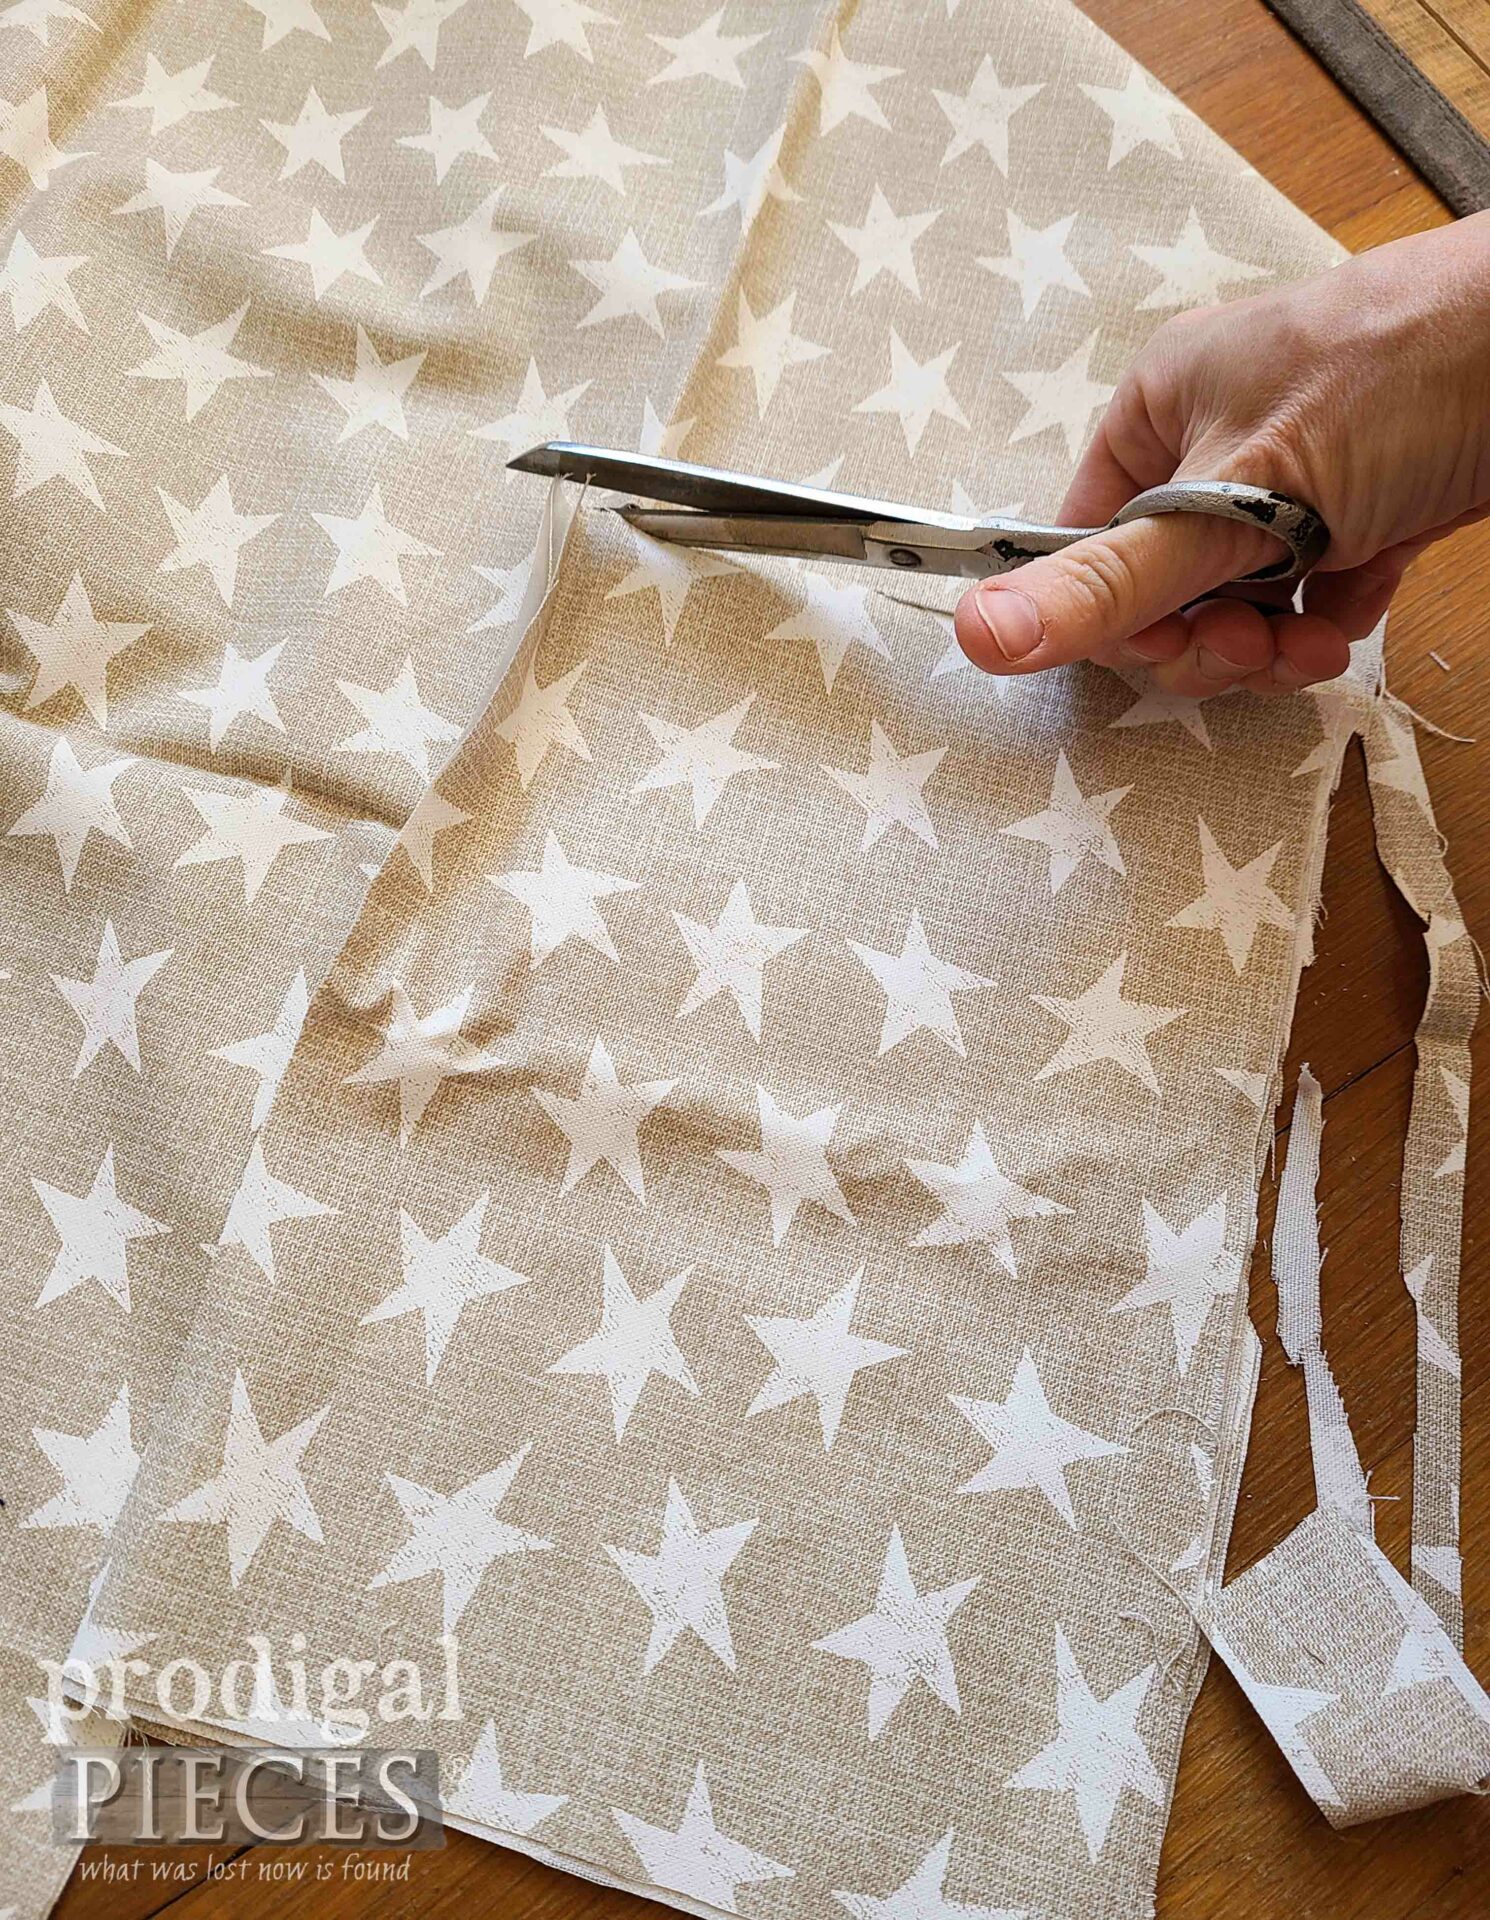 Cutting Star Fabric for Lining of DIY Freestanding Pouch | prodiagalpieces.com #prodigalpieces